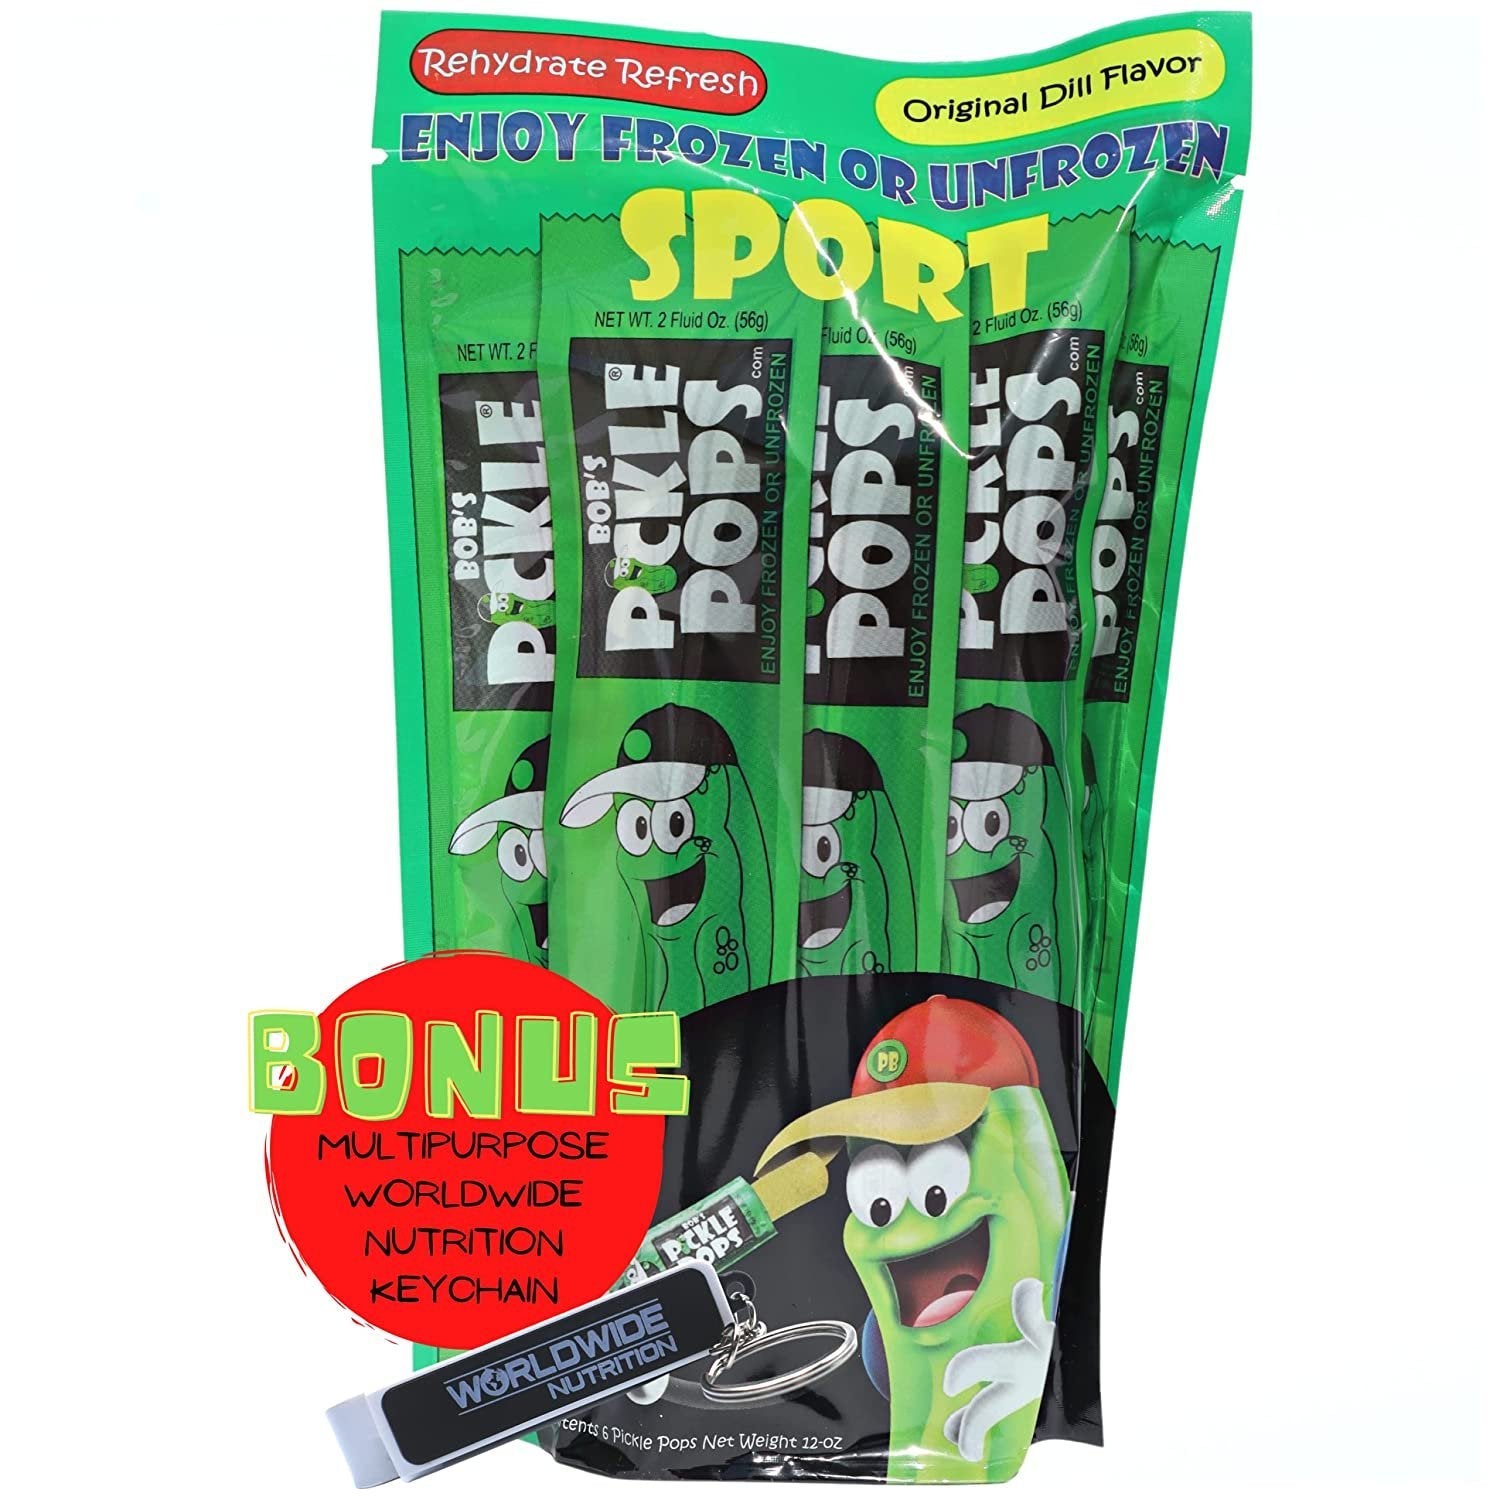 Bobs Pickle Pops Mucho Macho Original Dill - Electrolytes Freezer Pops Pre Workout Hydration - Athlete Recovery Pickle Juice for Leg Cramps with Multi Purpose Key Chain